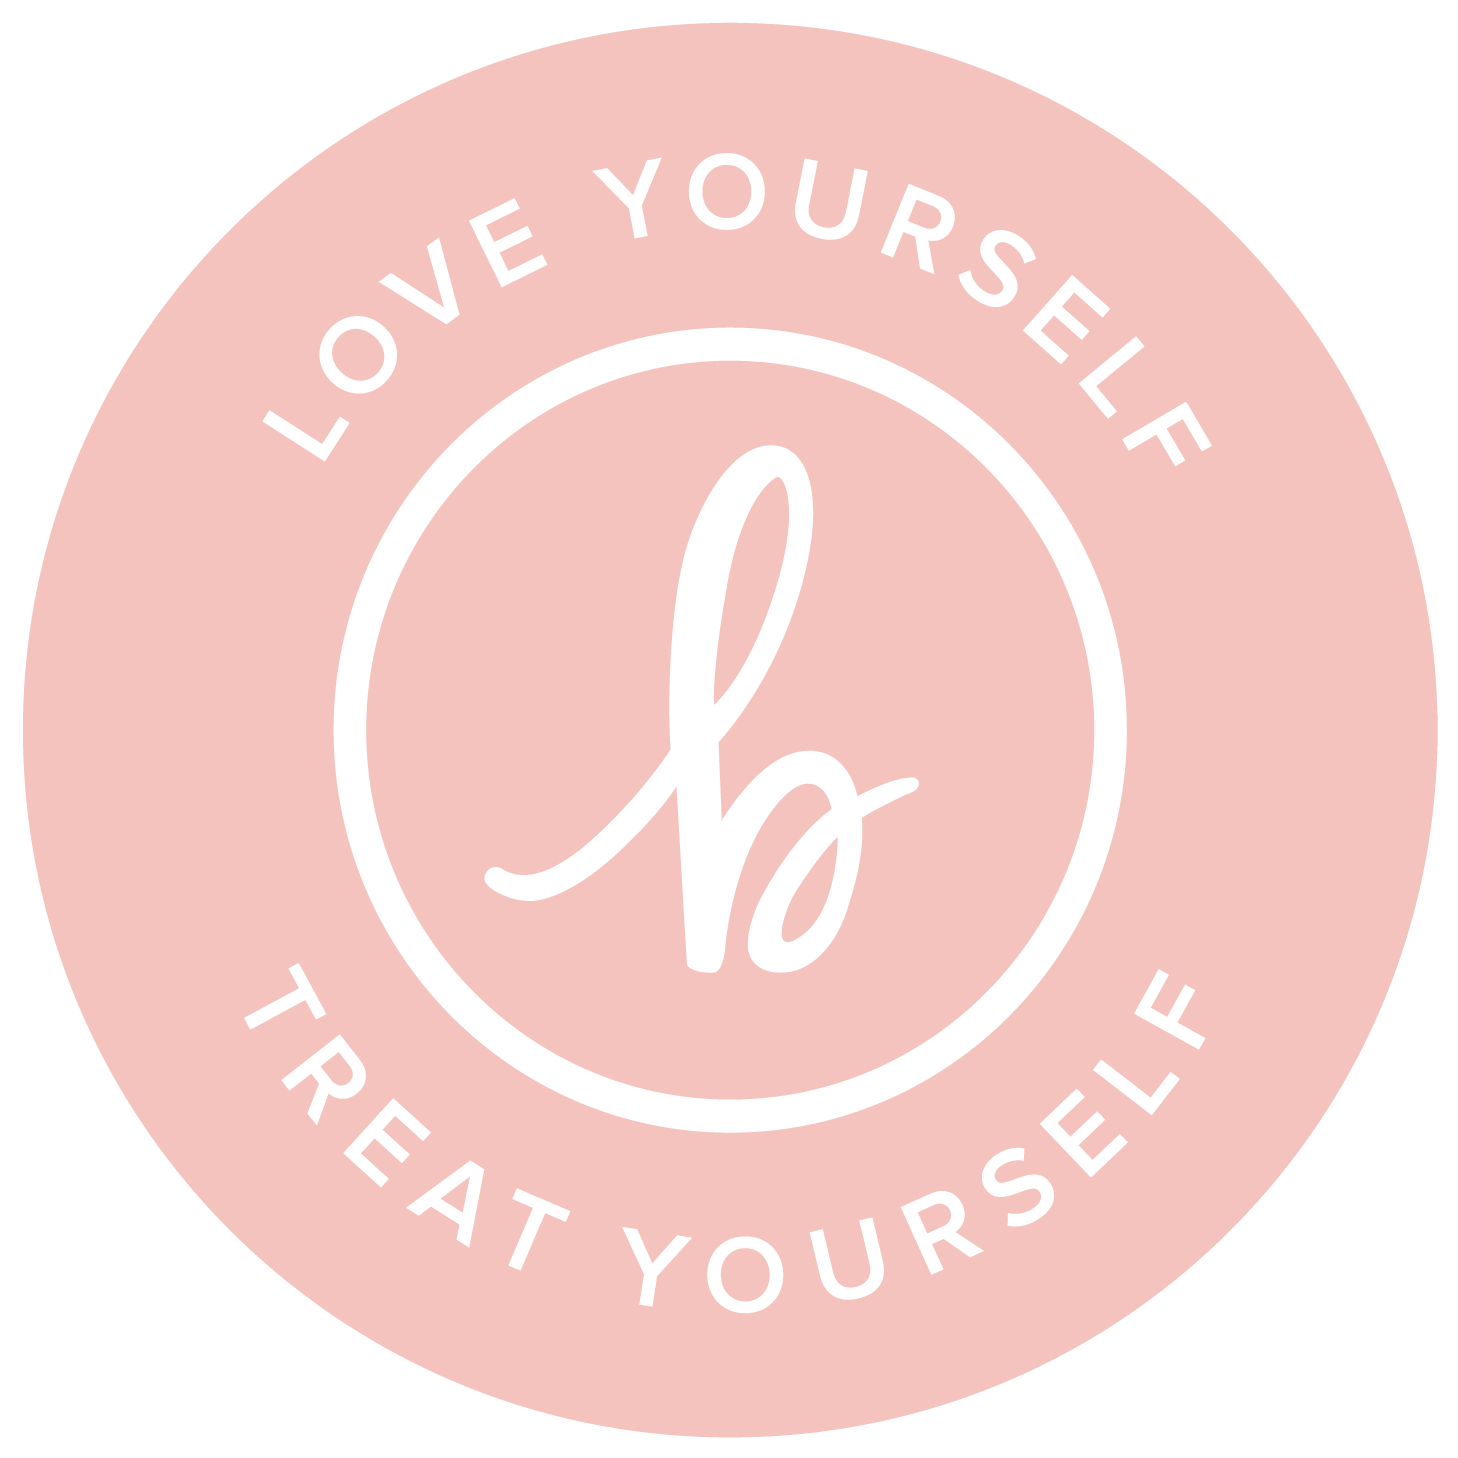 Love yourself, treat yourself